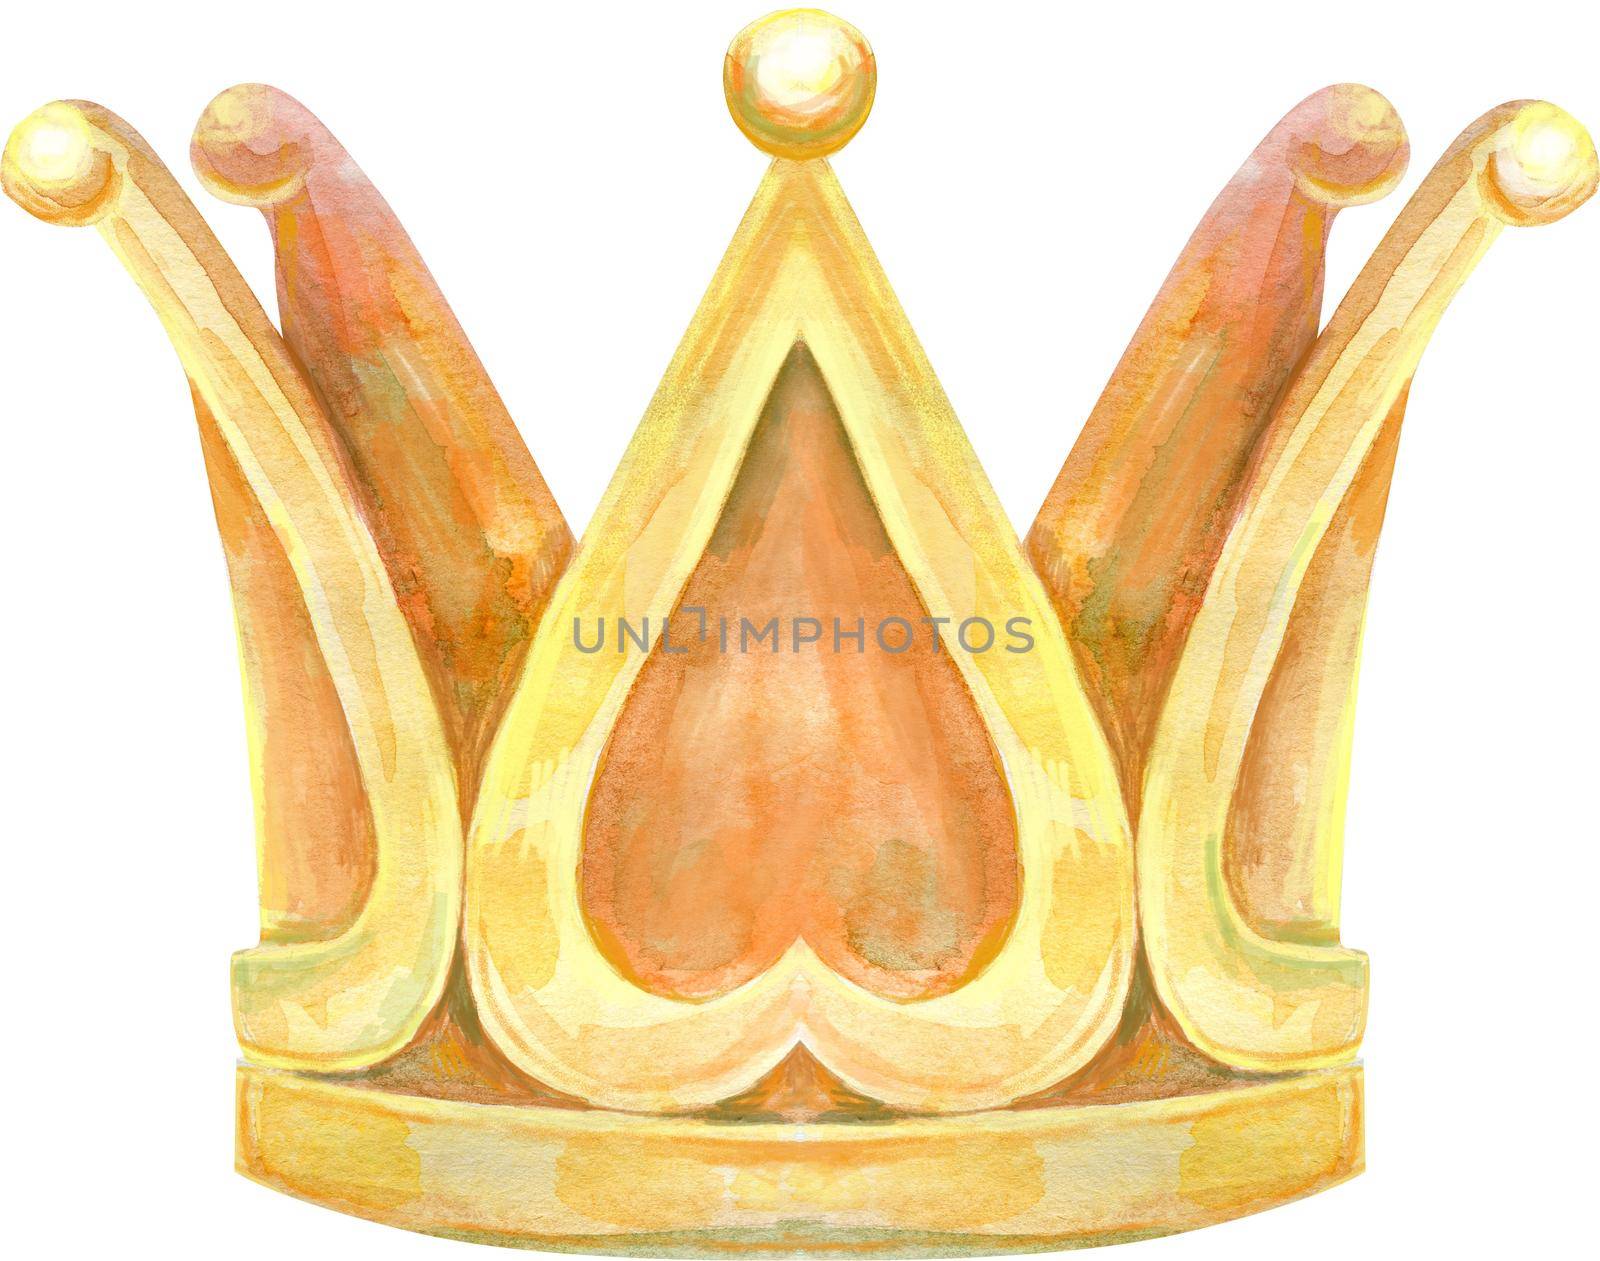 Watercolor Gold Crown with intertwining decorative elements